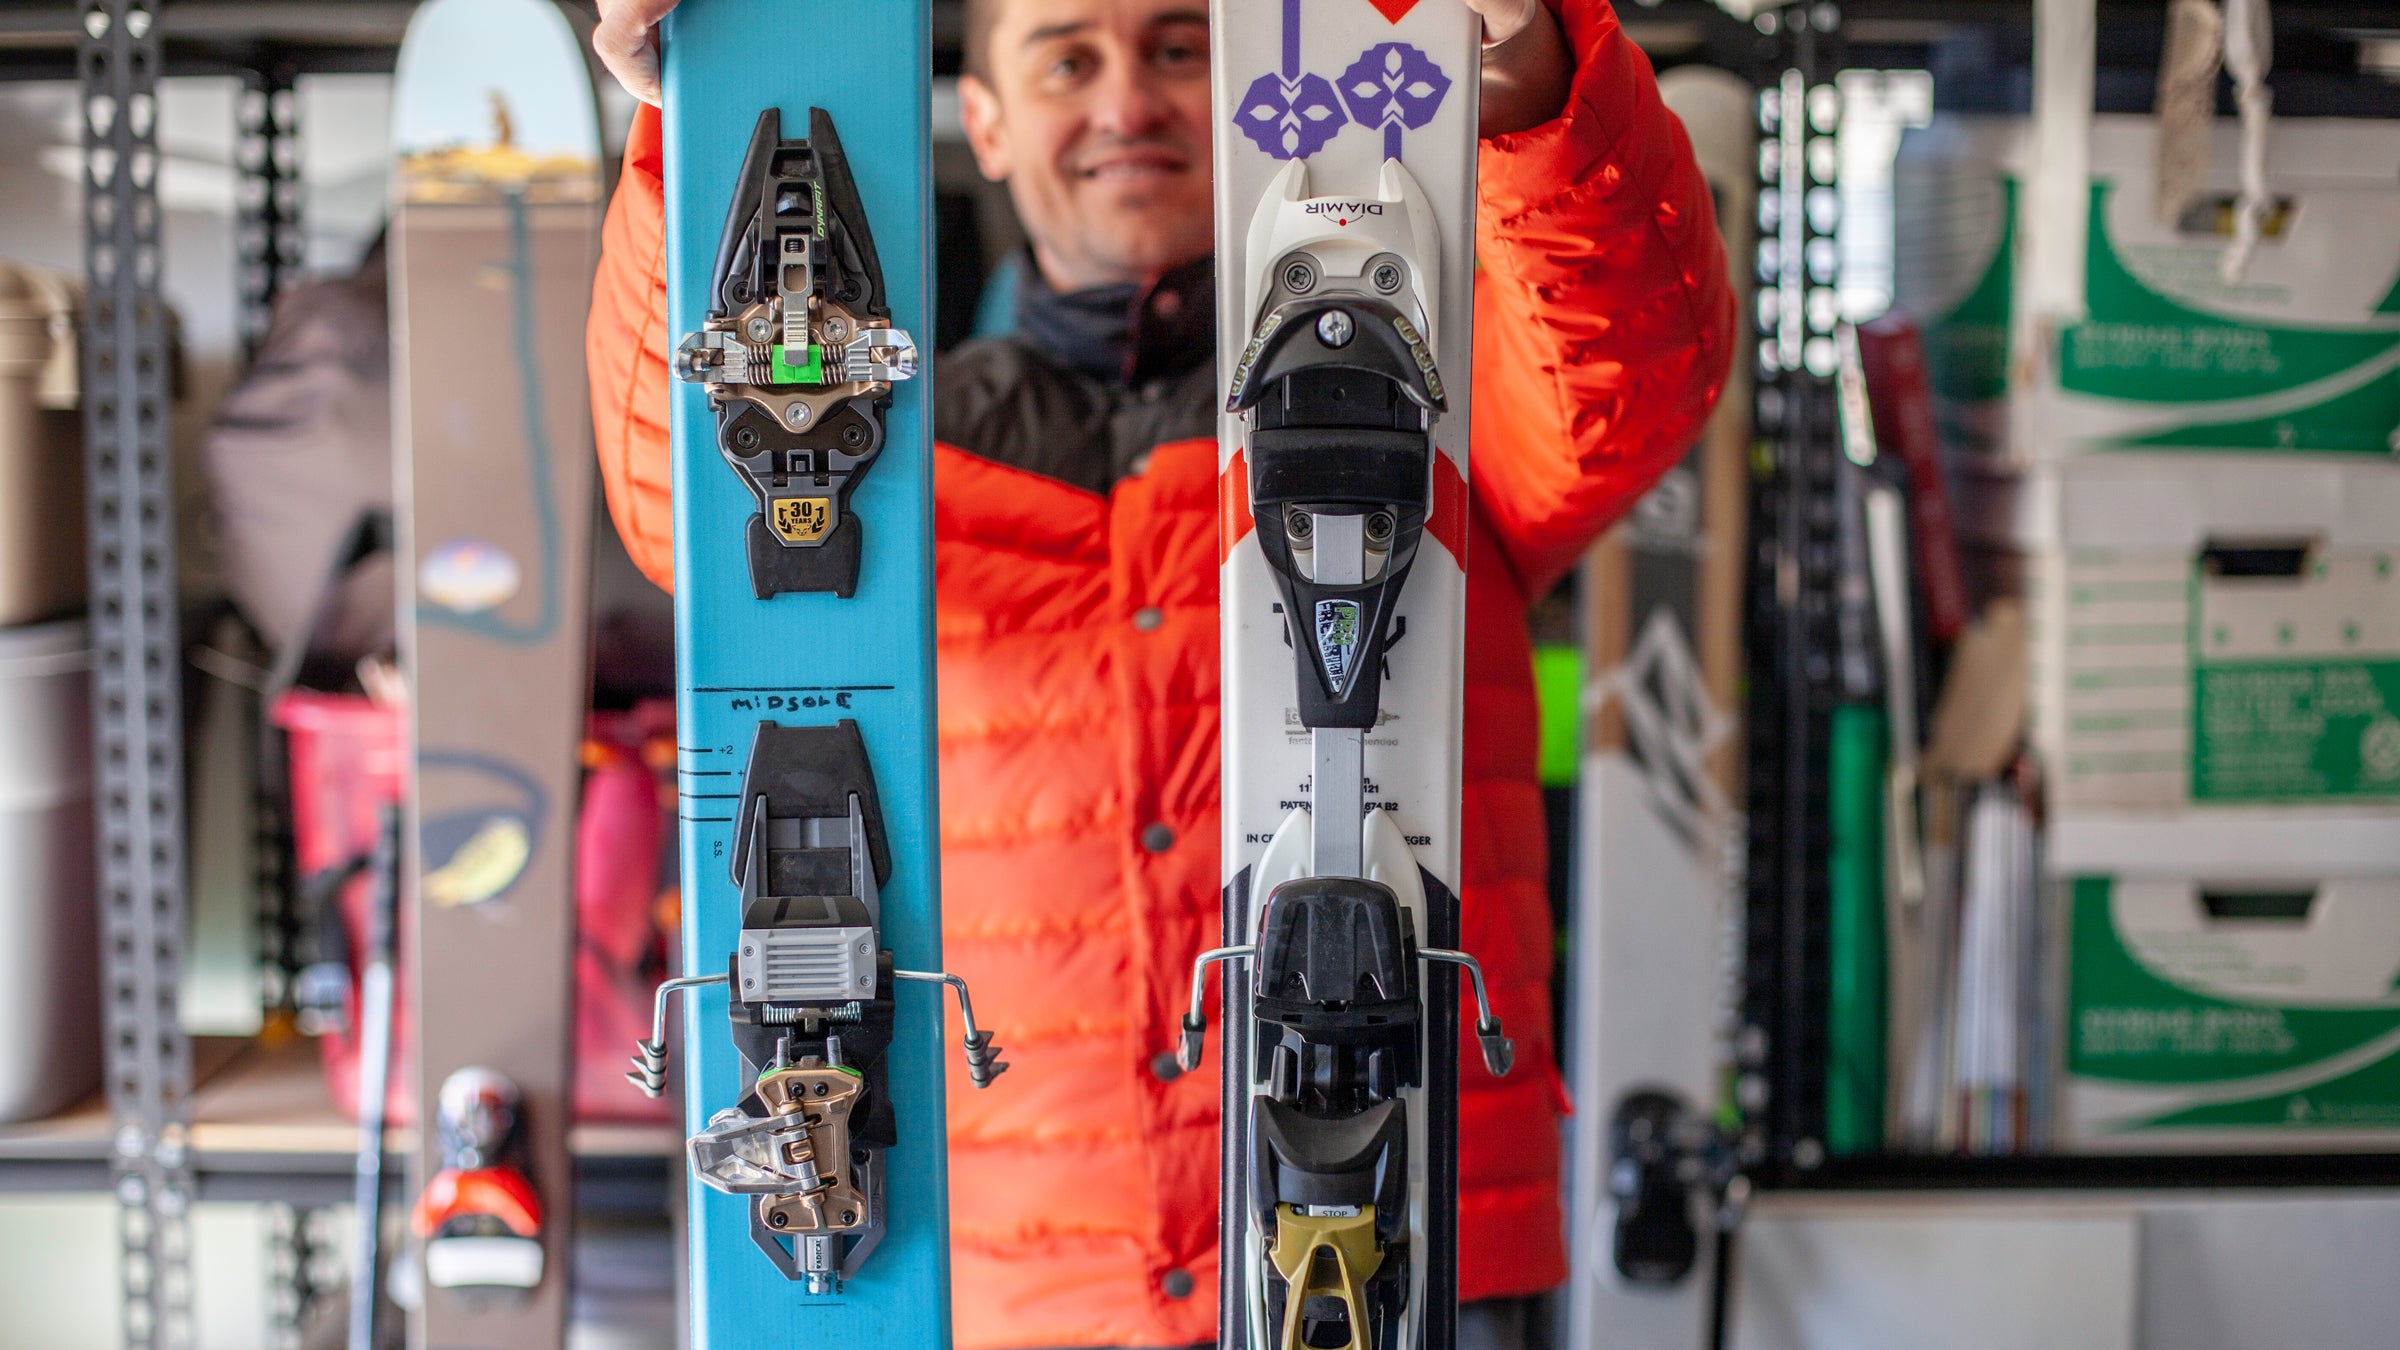 Ski Equipment And Accessories Stock Photo - Download Image Now